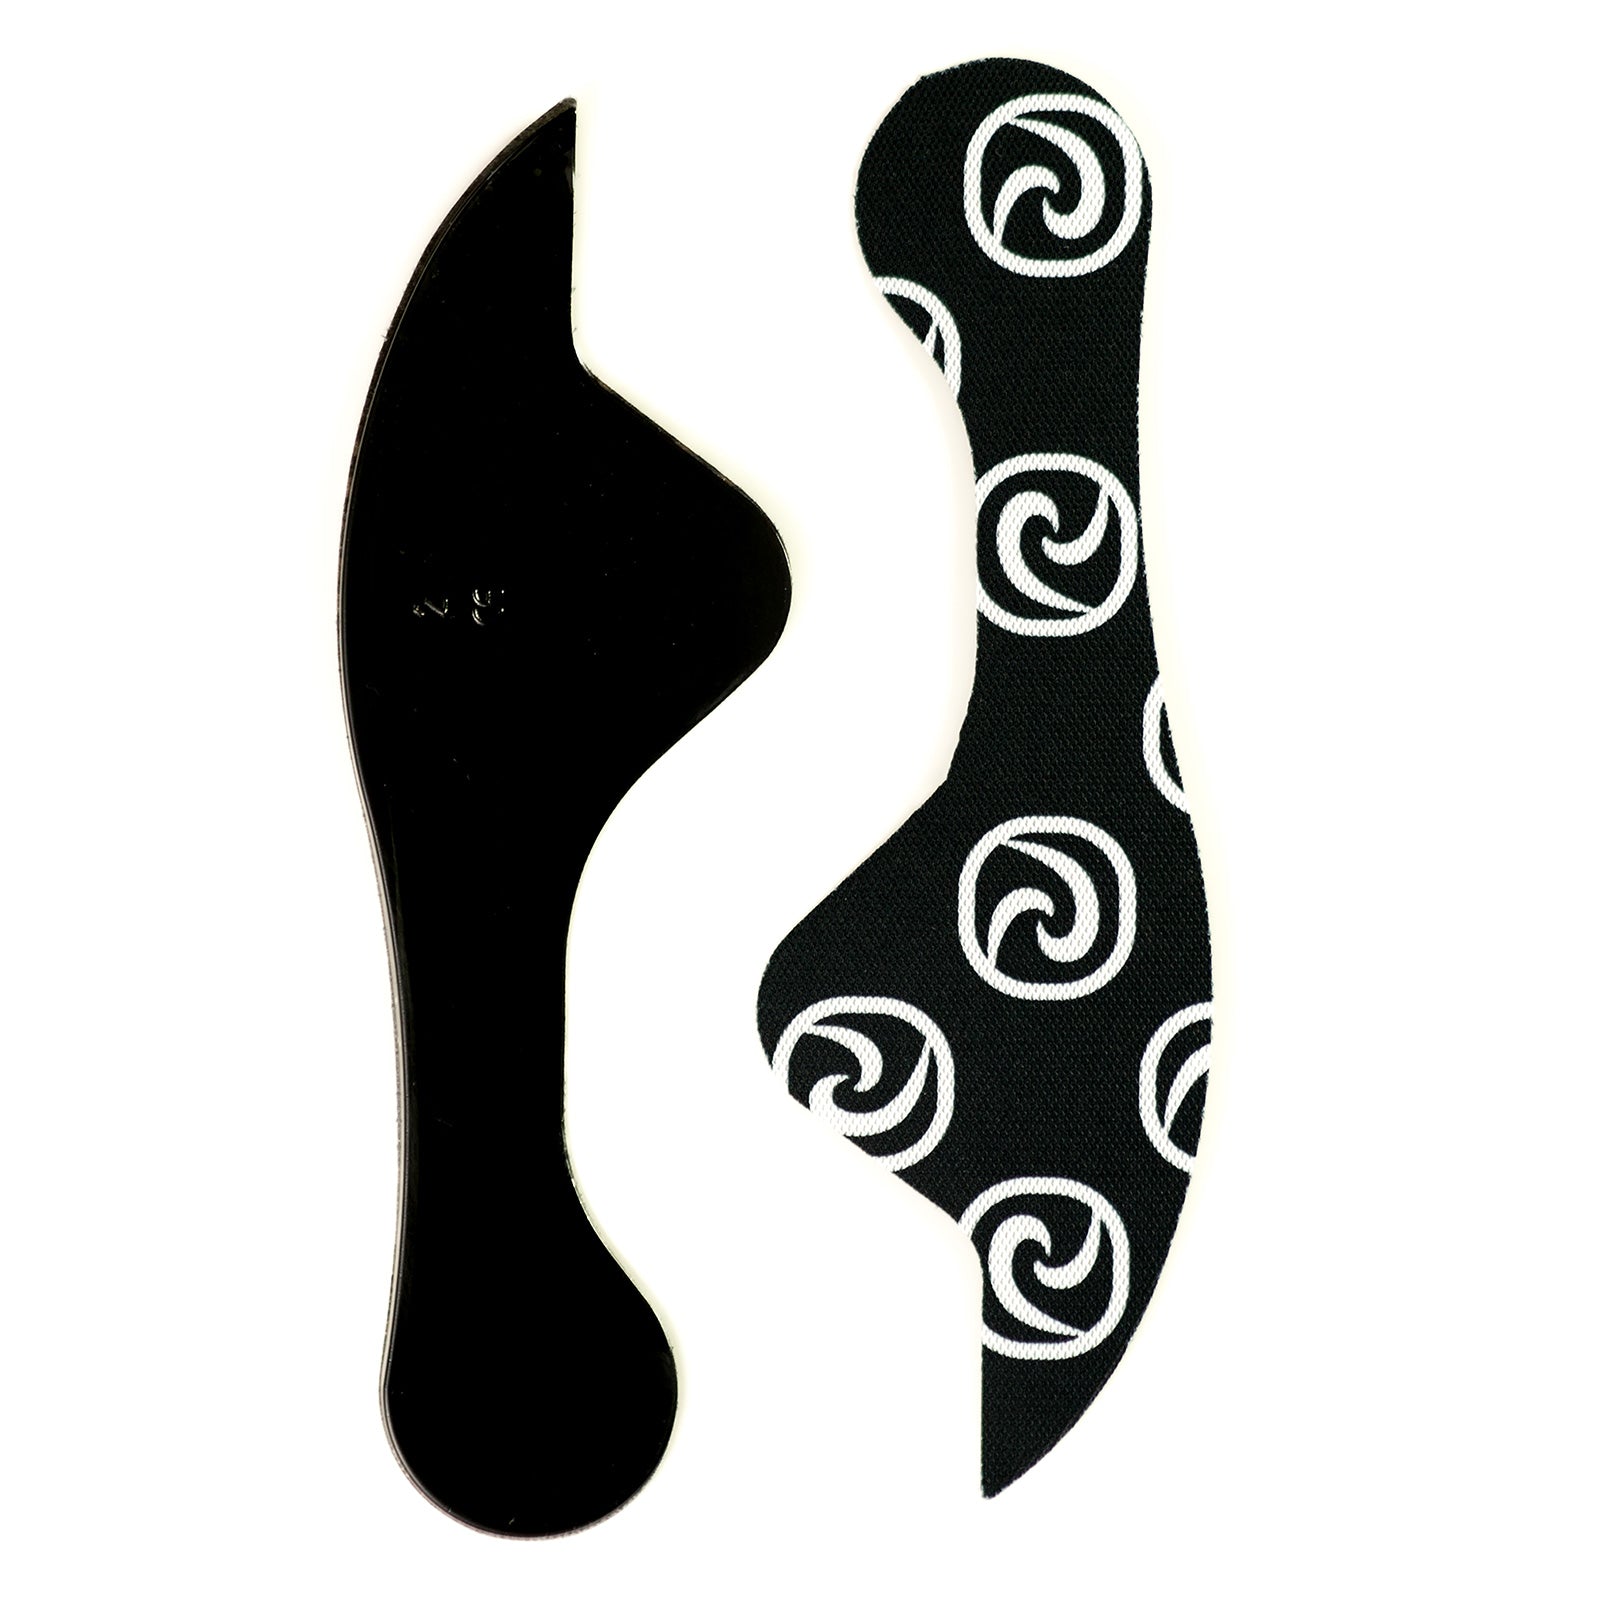 A black insole with white Rehband logos at the back made of Technogel®